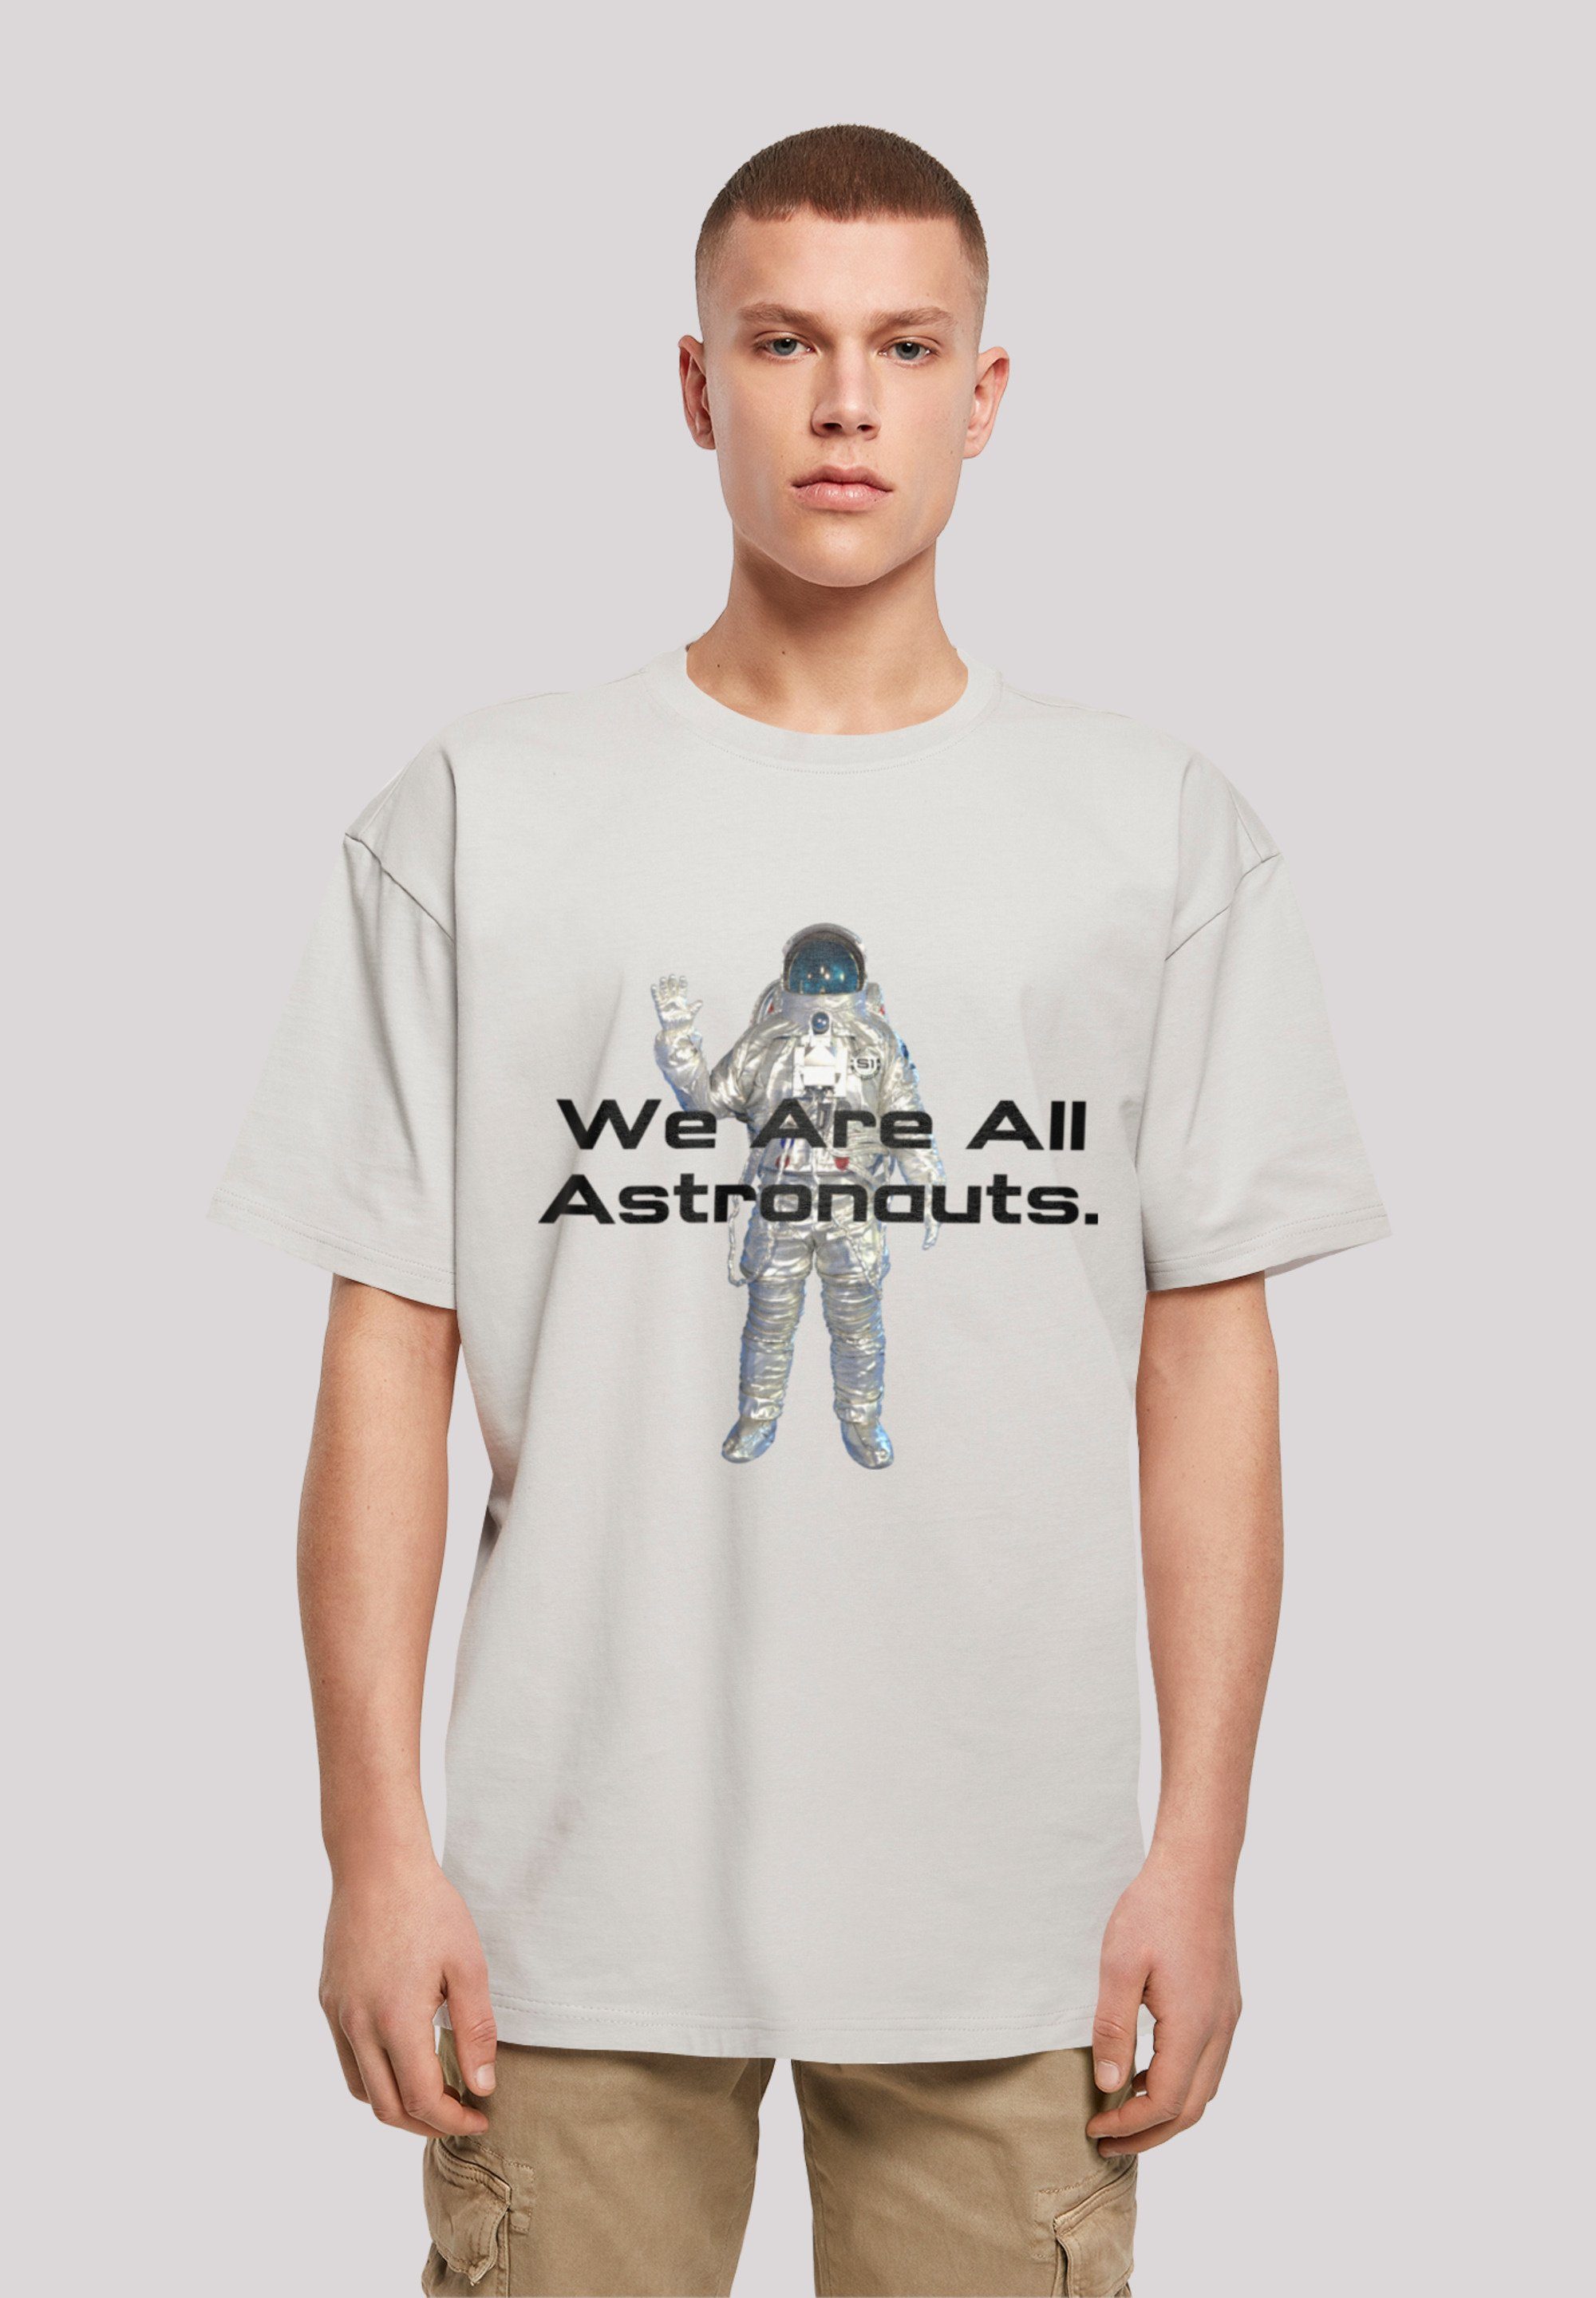 SpaceOne are F4NT4STIC Print lightasphalt We PHIBER all T-Shirt astronauts